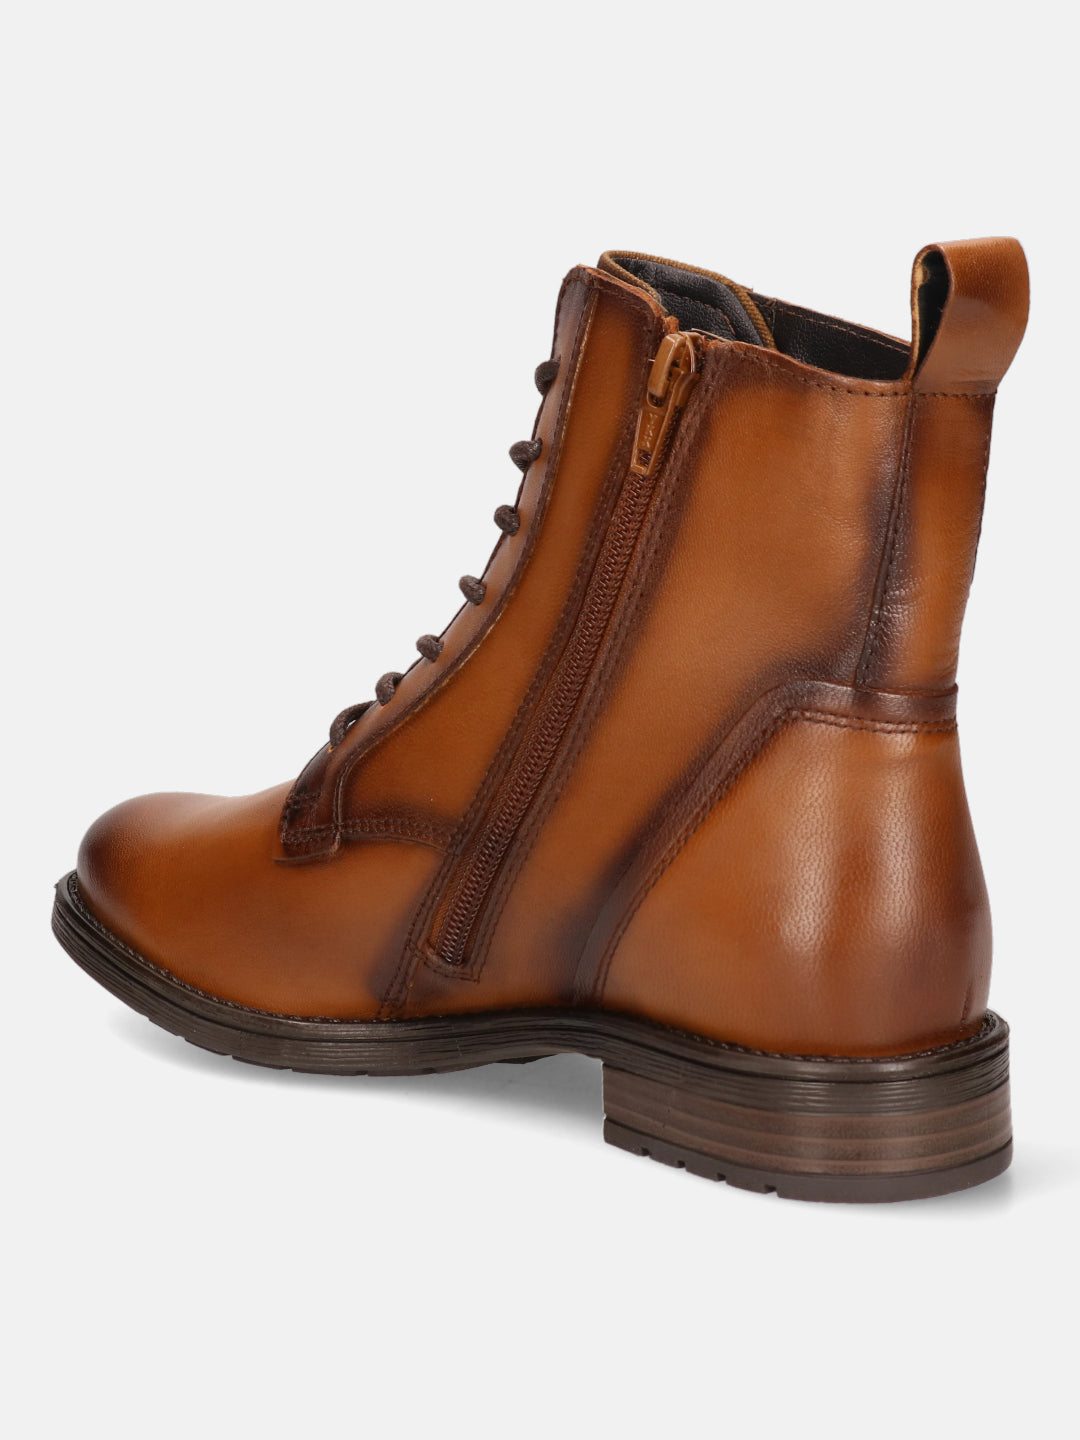 Ronja I Cognac Leather Ankle Boots